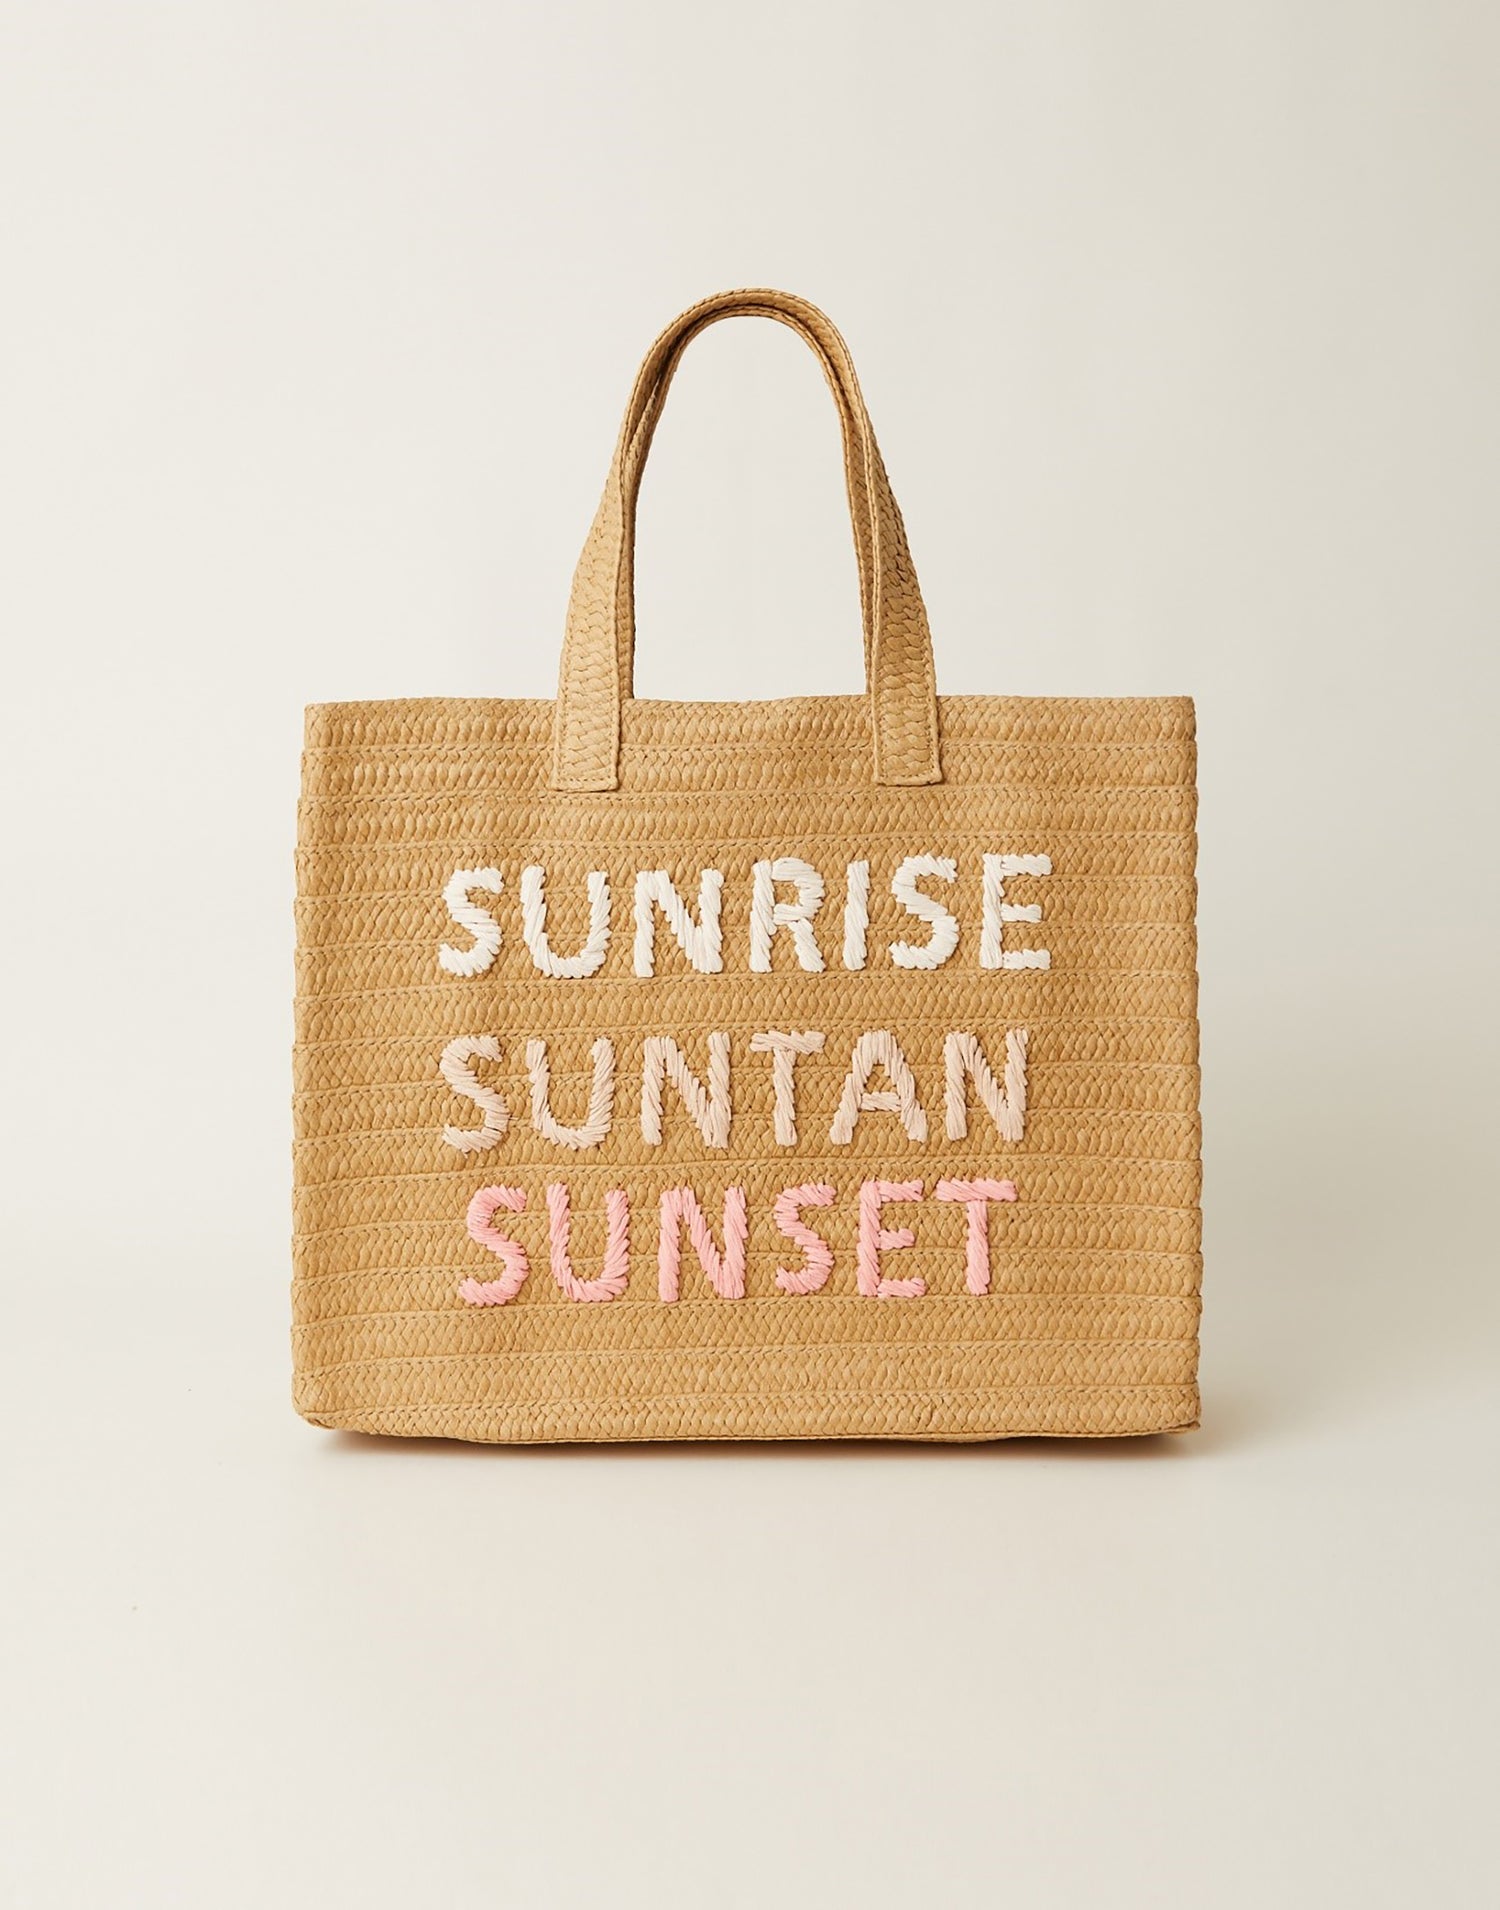 Sunrise, Suntan, Sunset Tote by BTB Los Angeles in Sand Coral Rainbow - Front View